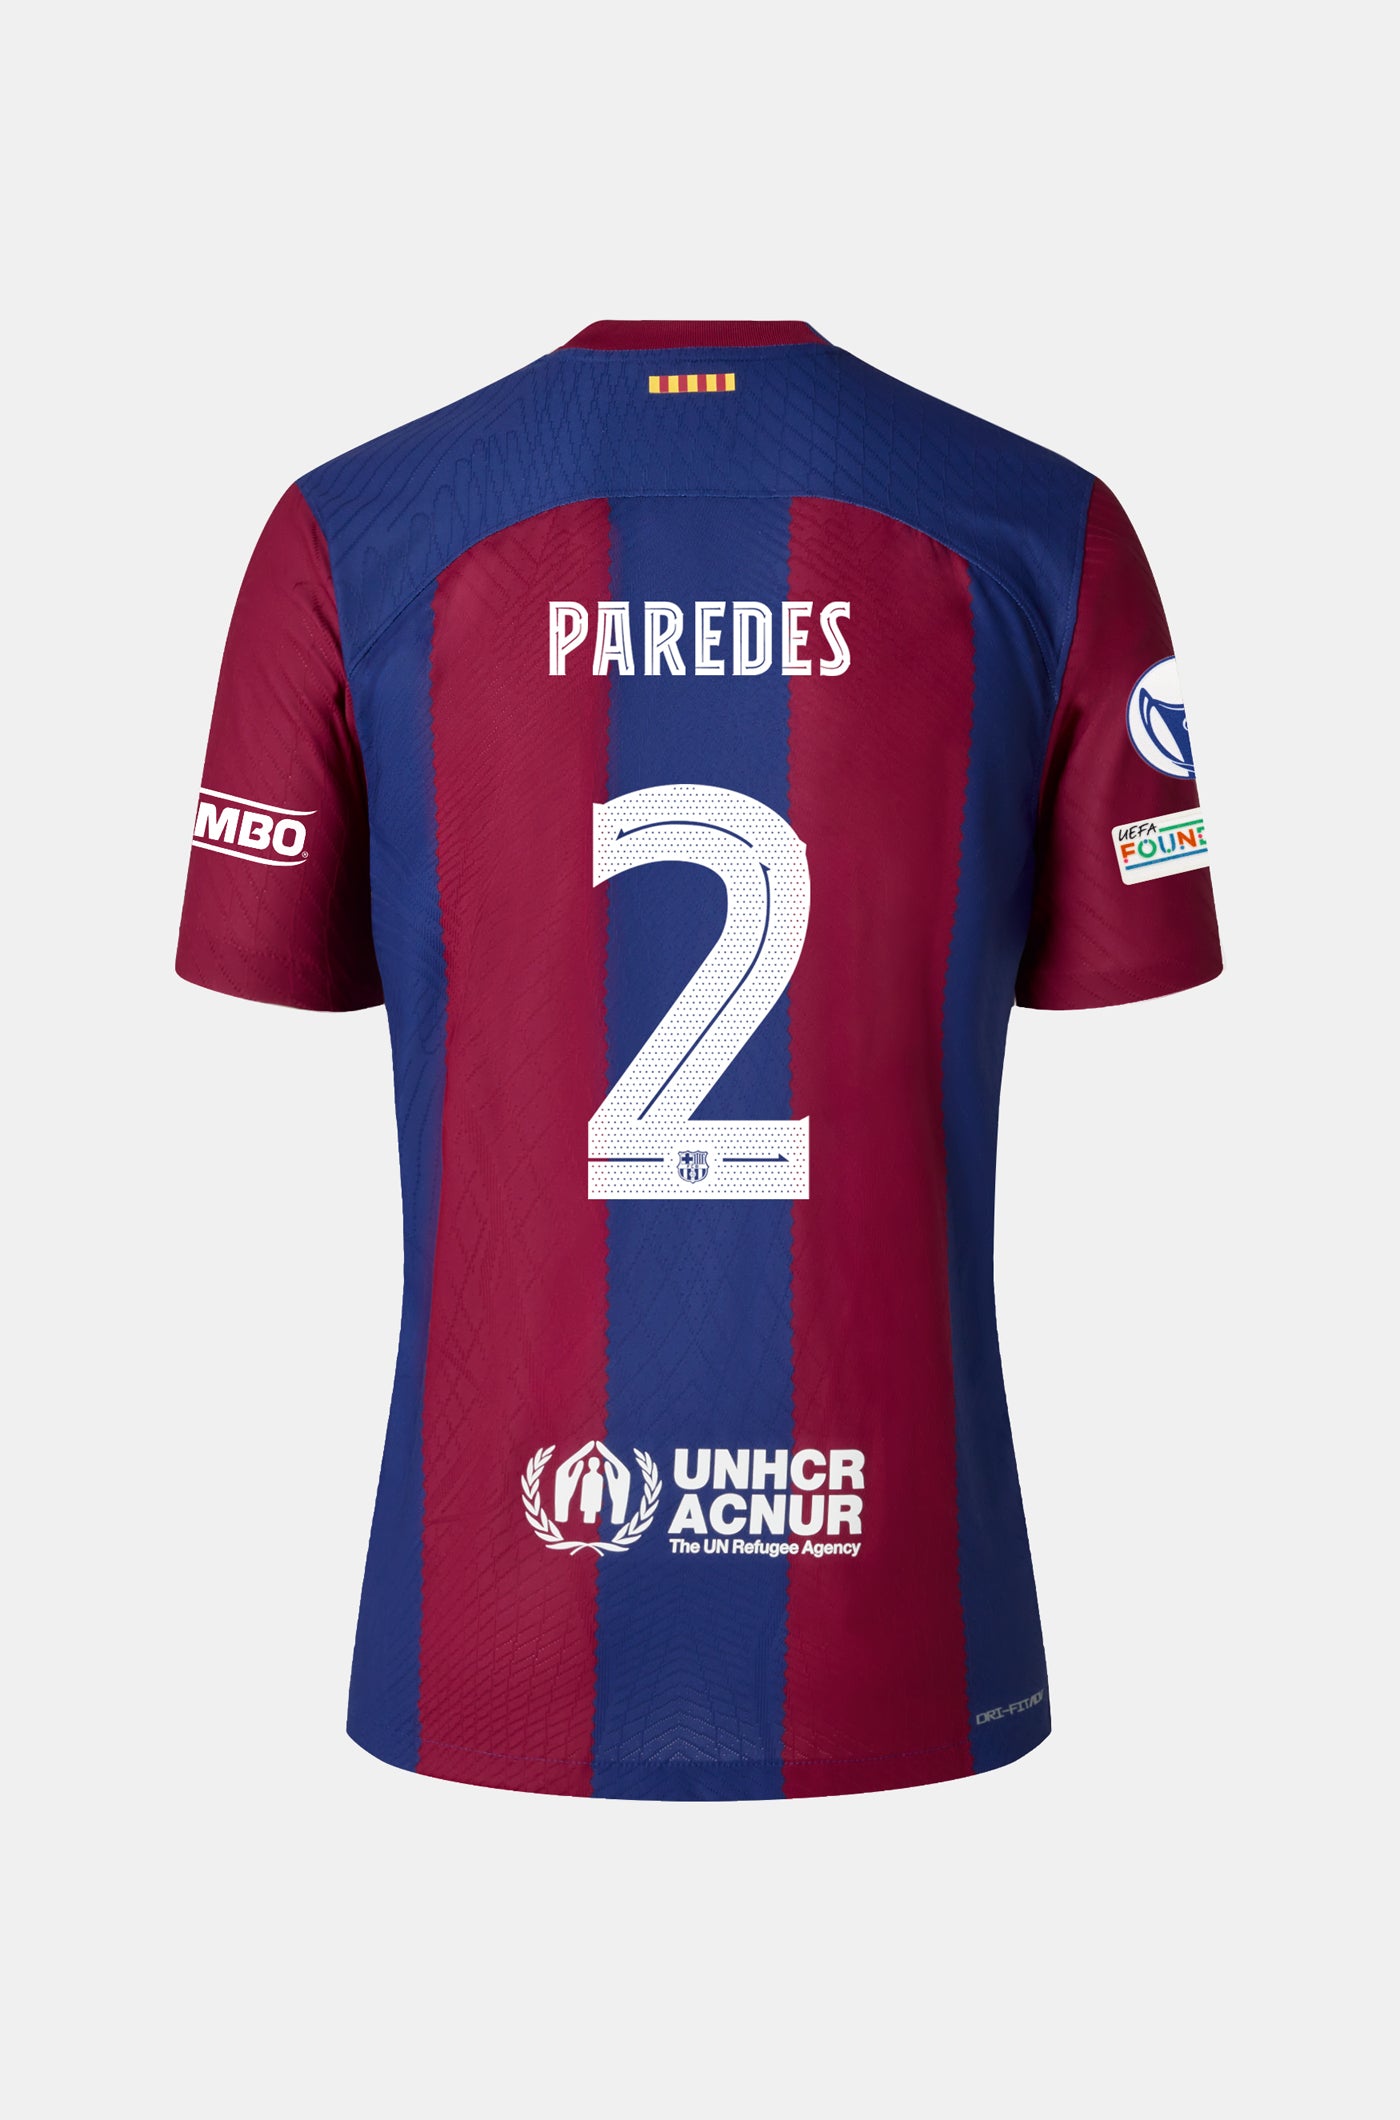 UWCL FC Barcelona home shirt 23/24 - Long-sleeve - PAREDES